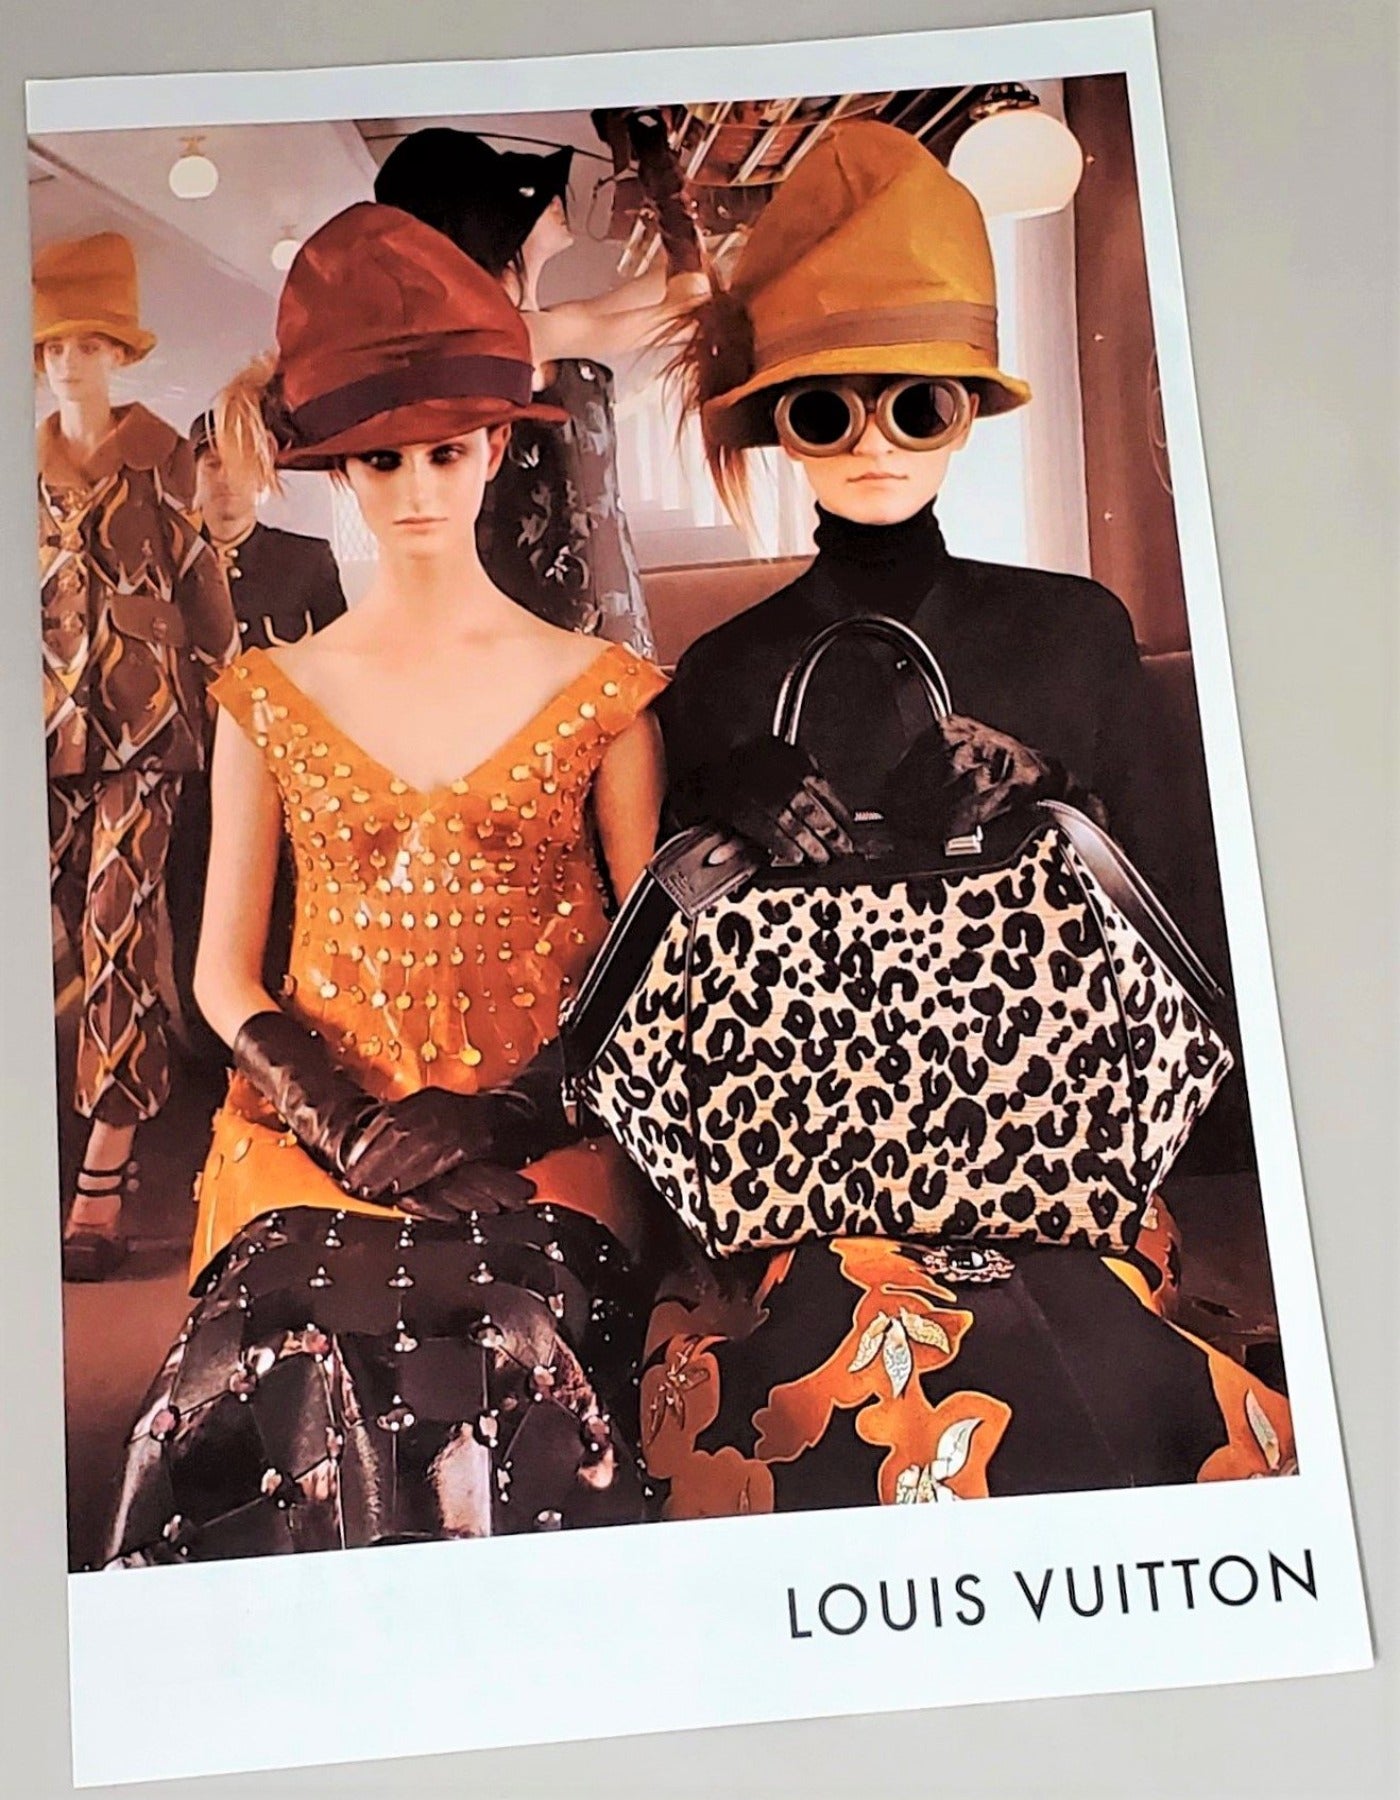 Original Louis Vuitton photograph advertisement page featured in September 2012 of Vogue magazine